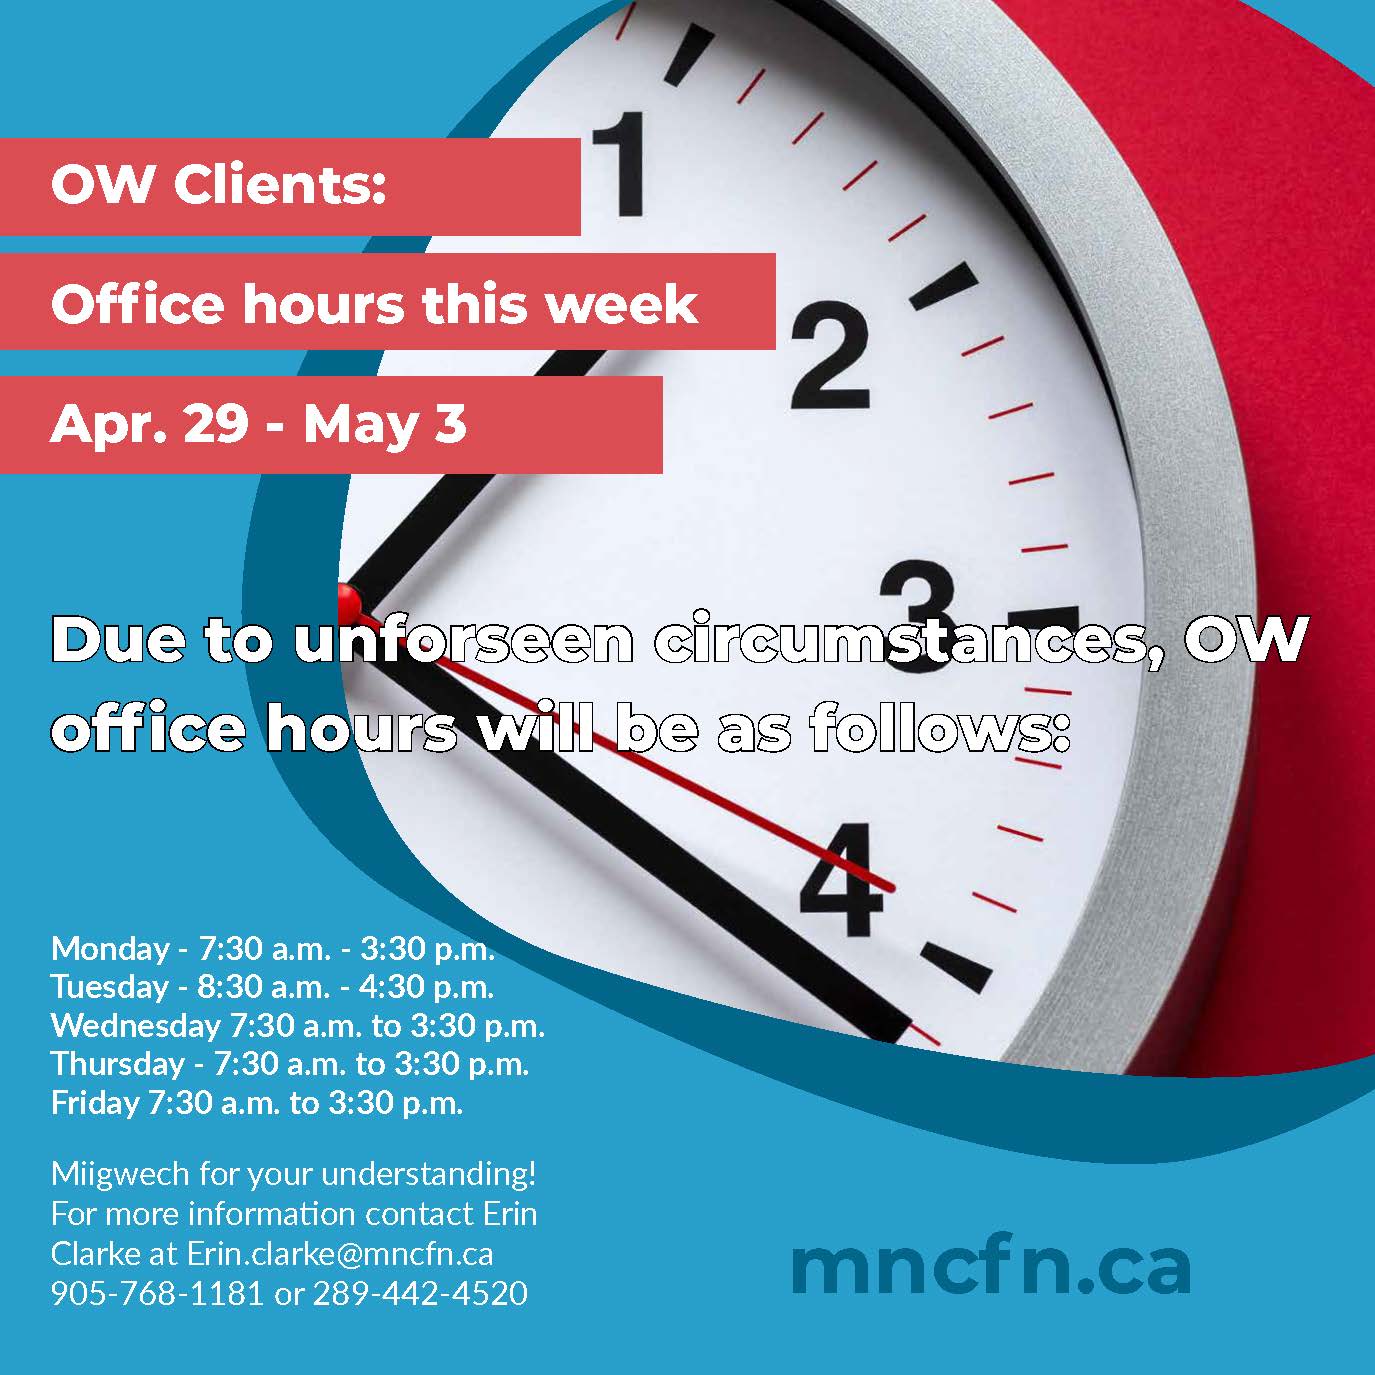 OW office hours April 29 - May 3